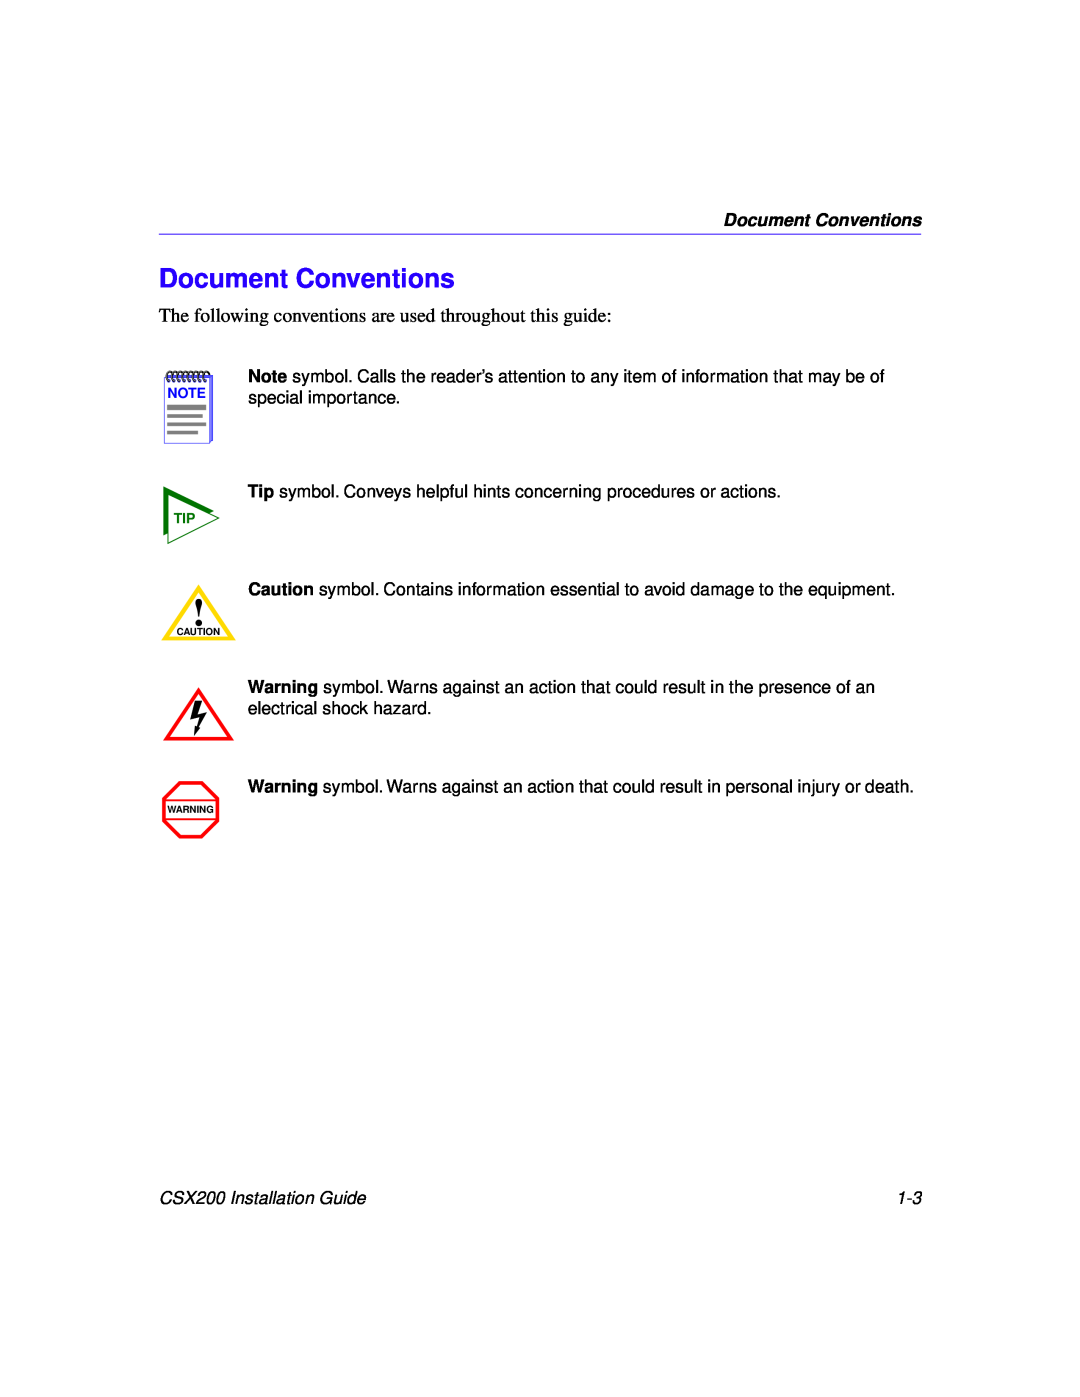 Cabletron Systems CSX200 manual Document Conventions, The following conventions are used throughout this guide 